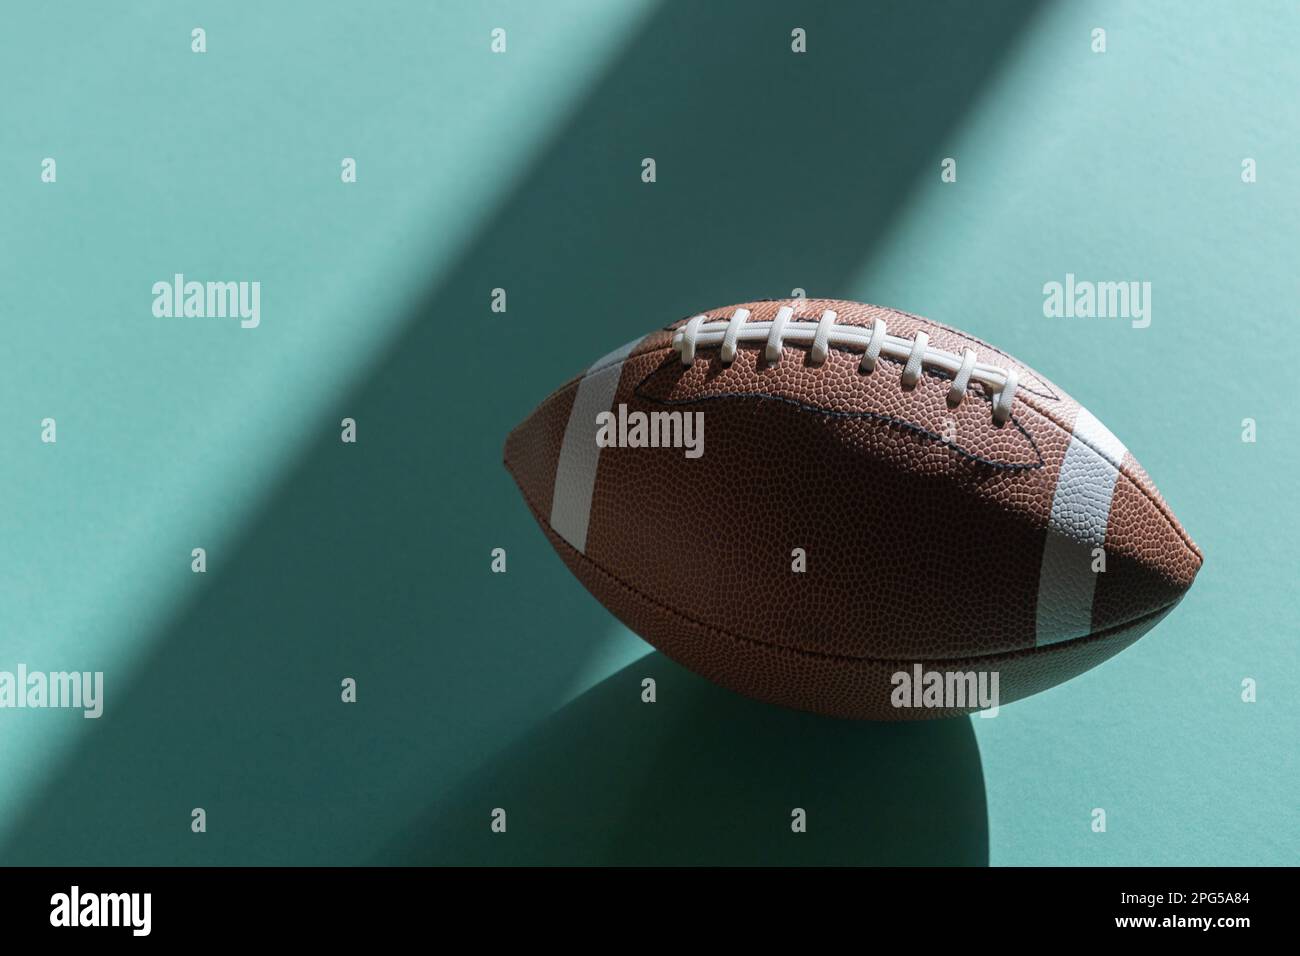 American football leather ball on mint color background. Top view. Game equipment horizontal sport theme poster, greeting cards, headers, website and Stock Photo